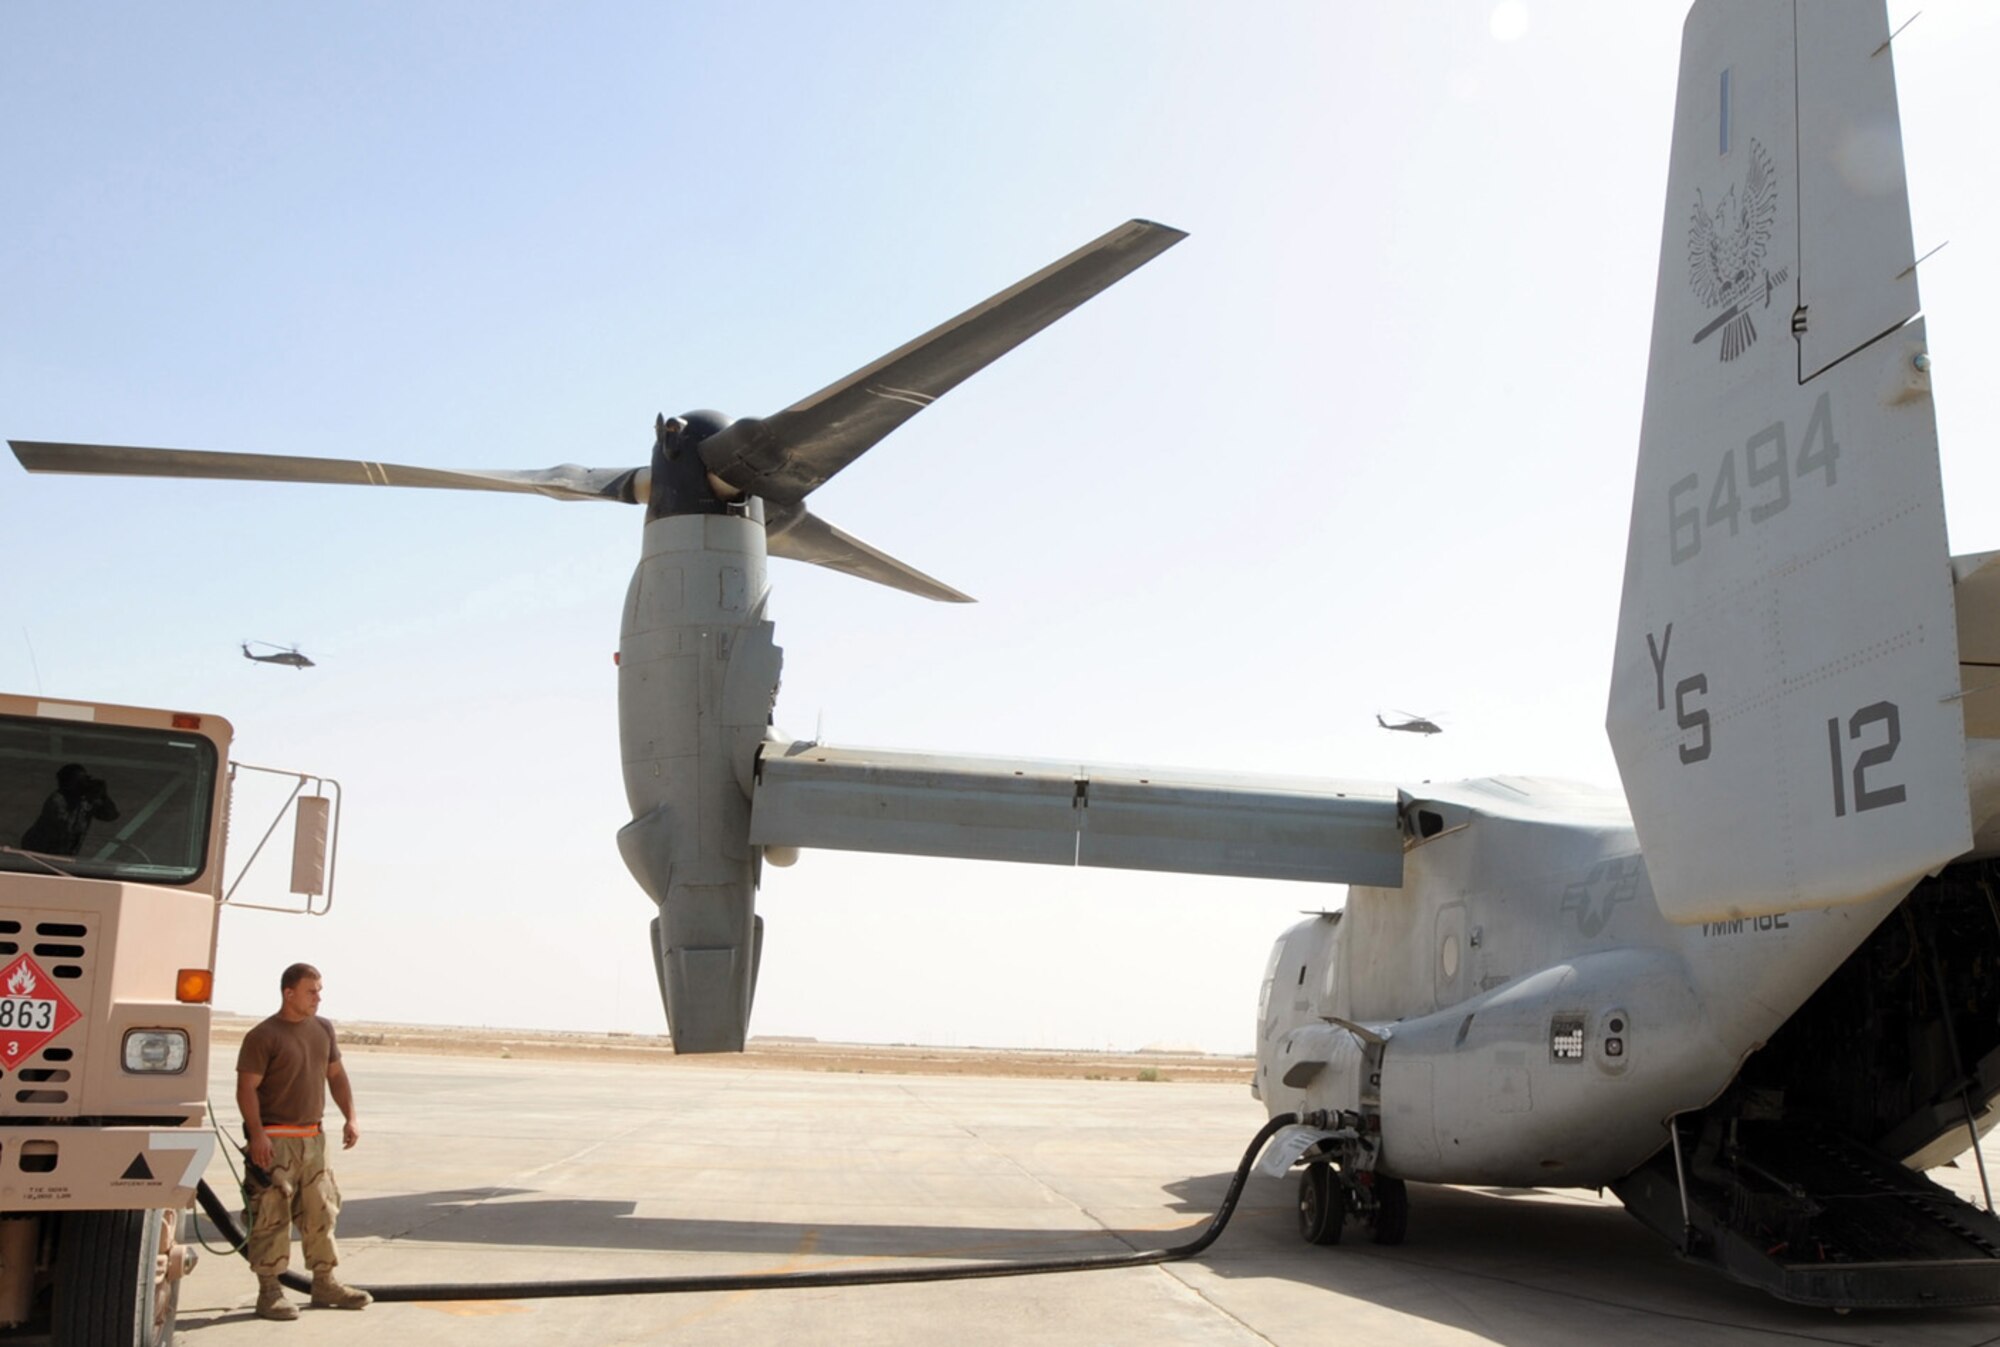 ALI BASE, Iraq -- Senior Airman Matthew Lawson, 407th Expeditionary Logistics Readiness Squadron refueling unit operator, refuels a V-22 Osprey here April 24.  The Petroleum, Oil and Lubricants section refuels various cargo aircraft from around the Area of Responsibility.  Airman Lawson is deployed from Ramstein Air Base, Germany.  (U. S. Air Force photo / Tech. Sgt. Sabrina Johnson)